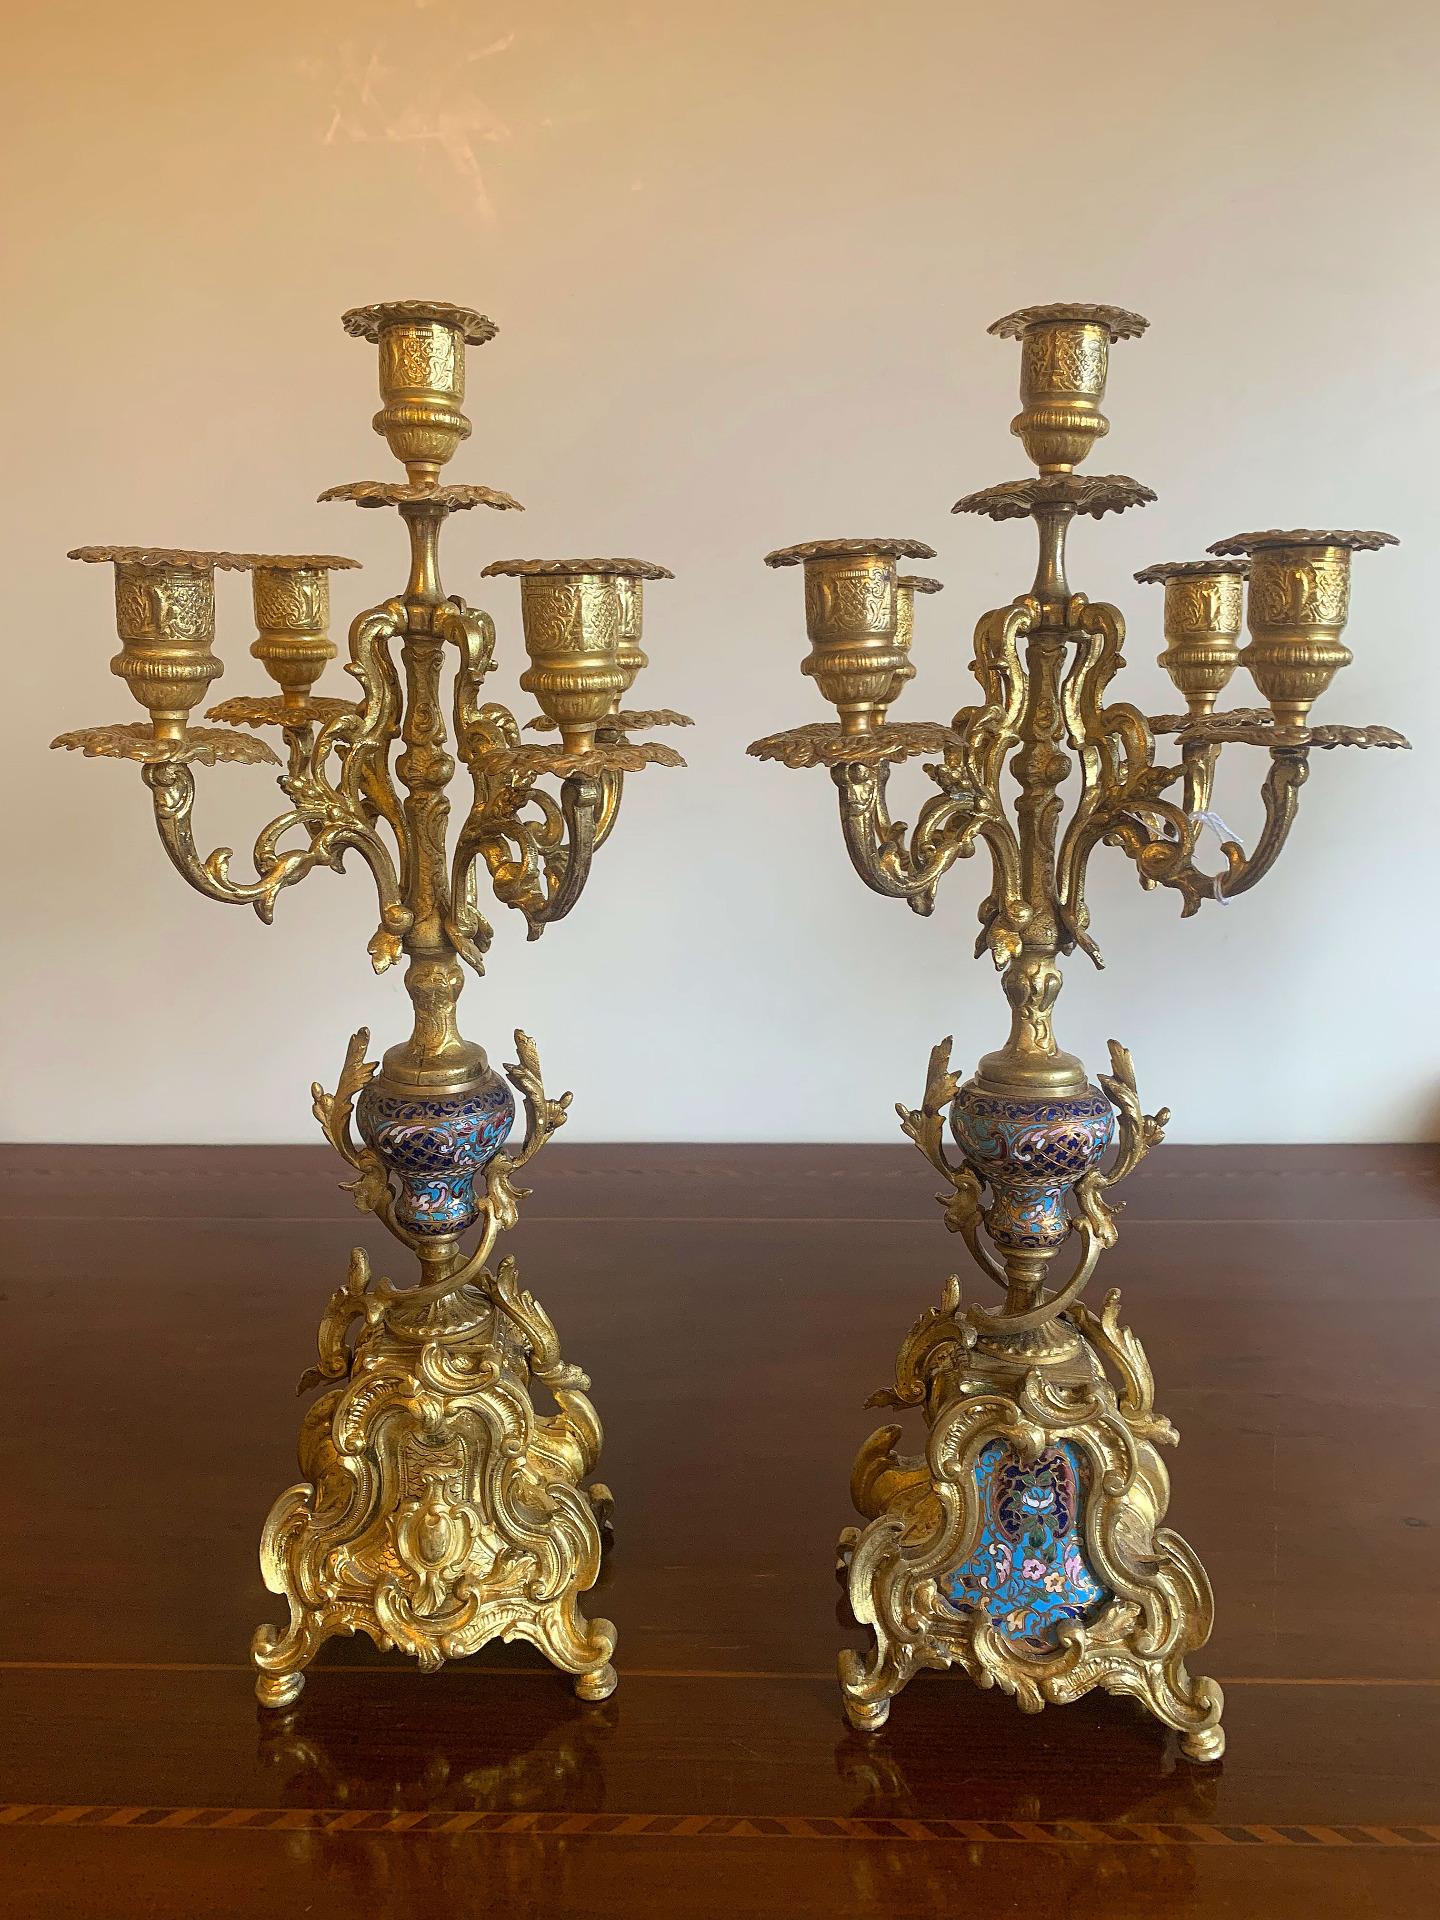 Bronze 19th Century Pair of Candlesticks With Glassonné Inserts For Sale